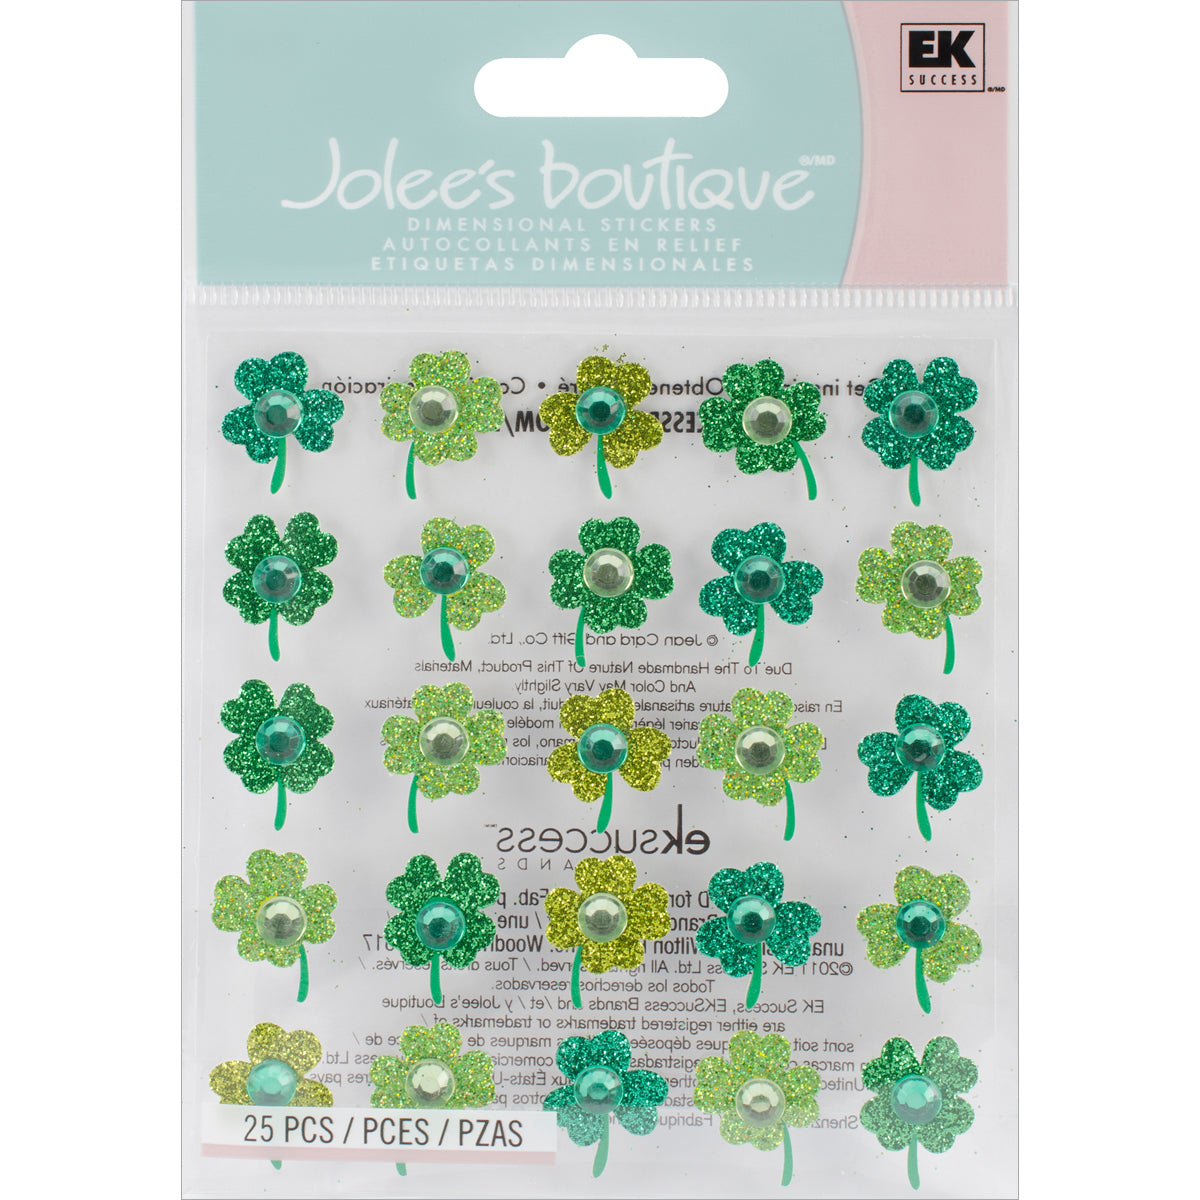 Jolee's Cabochon Dimensional Repeat Stickers-Clover Repeats